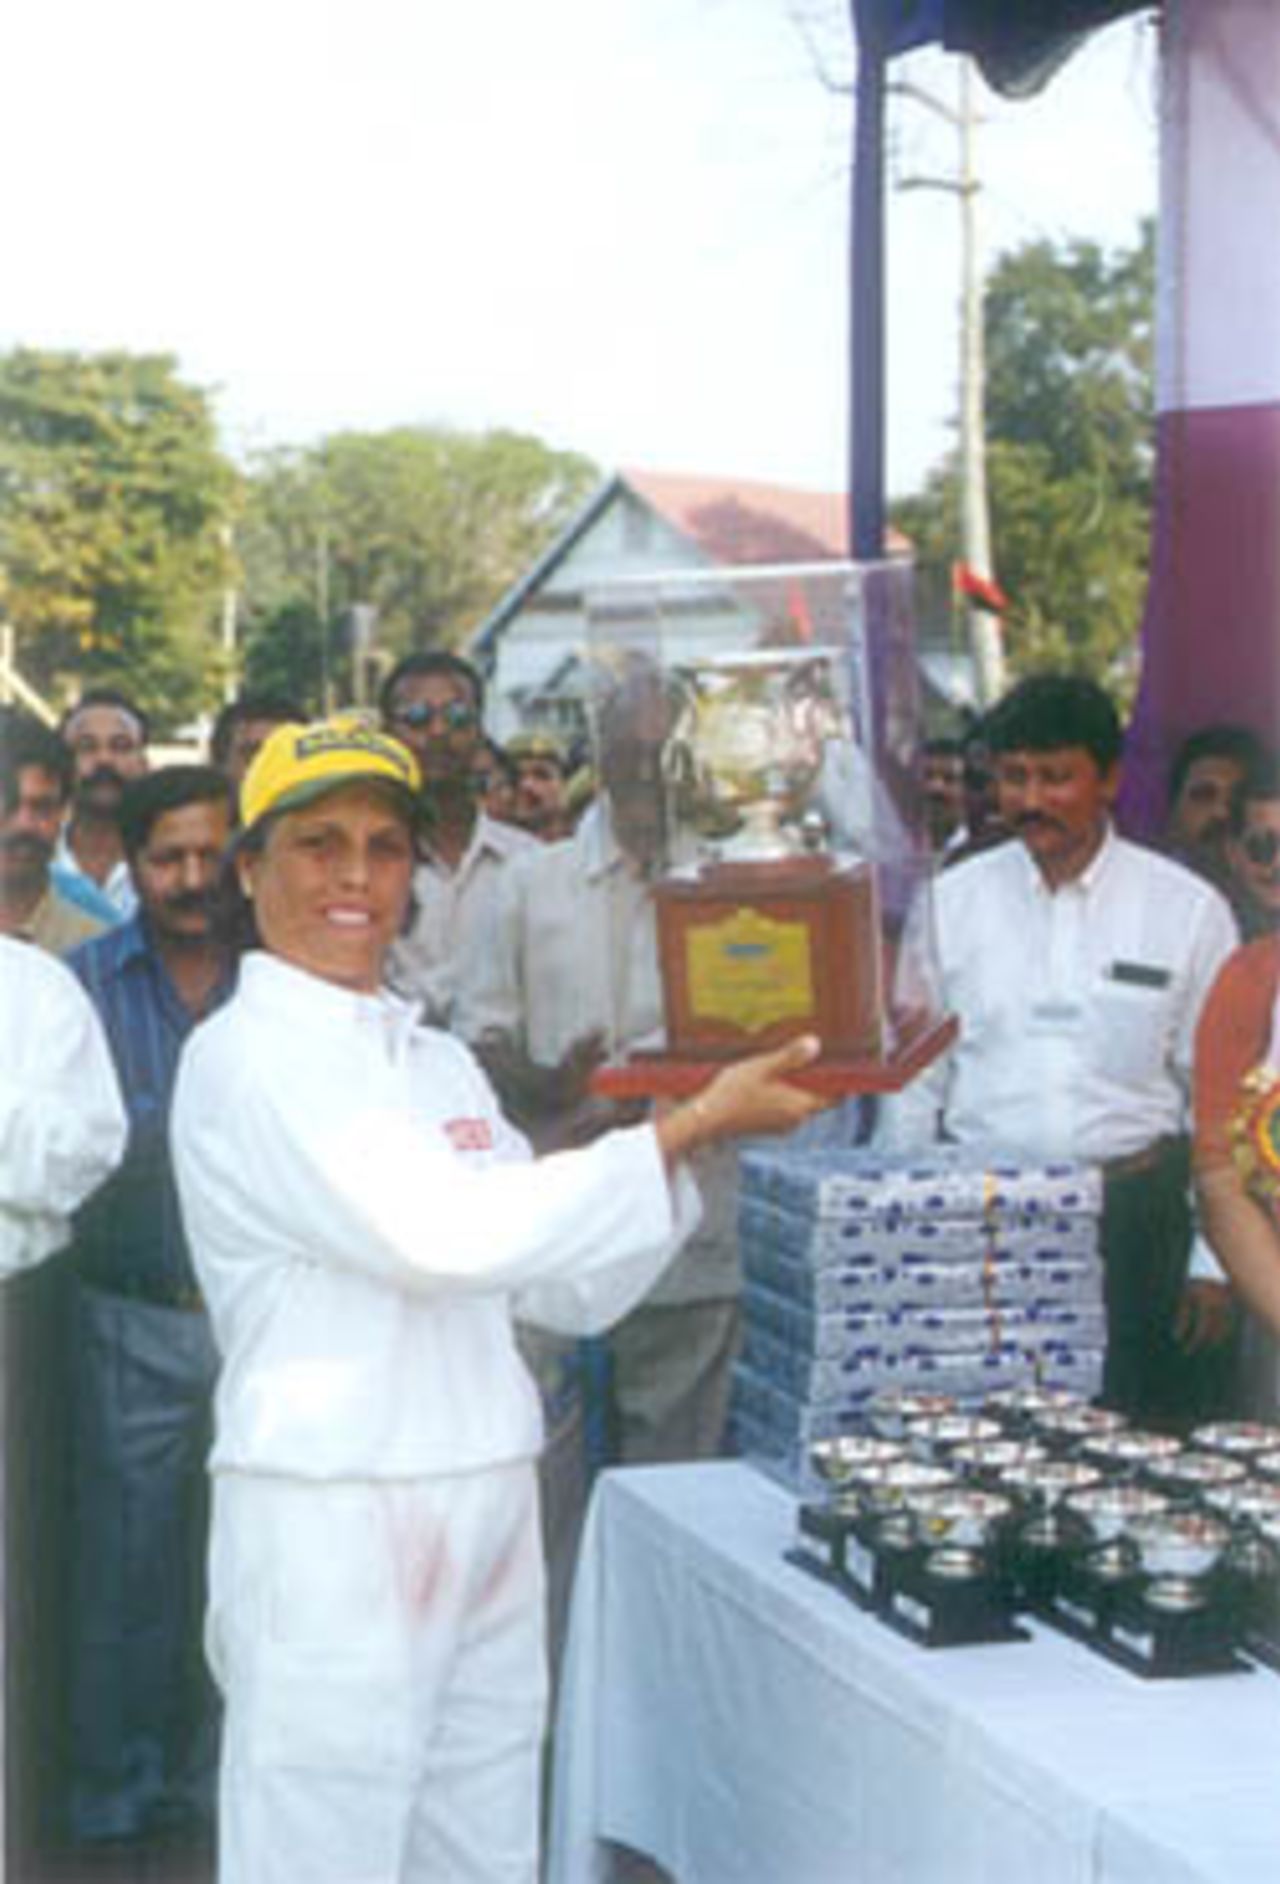 The captain of the Railways team, Diana Edluji, holds up the CricInfo Trophy, Air India v Indian Railways Senior Womens National Cricket Championship, 2000 (Final), Jorhat Stadium, 25-27 March 2000.